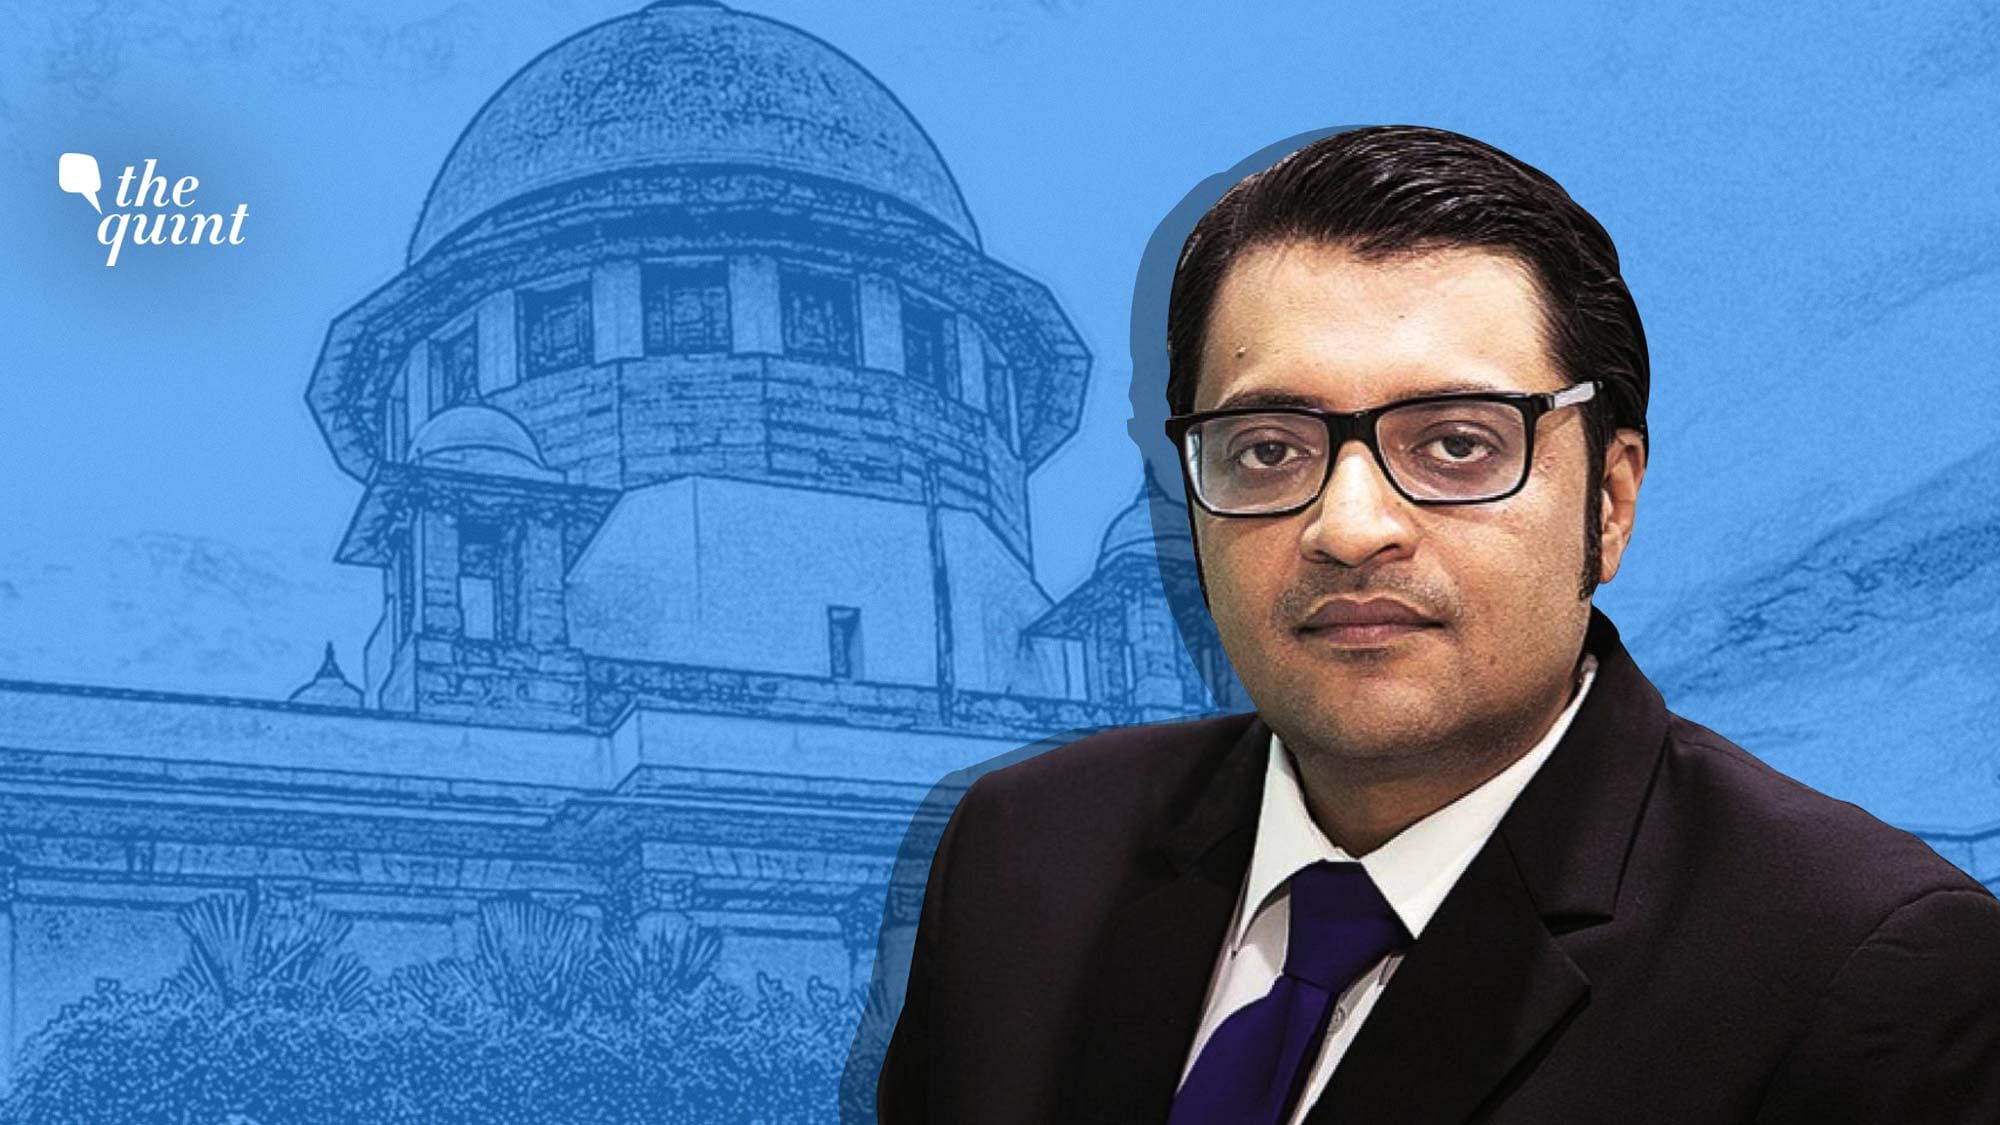 Arnab Goswami has filed another case in the Supreme Court of India in connection with the cases against him.